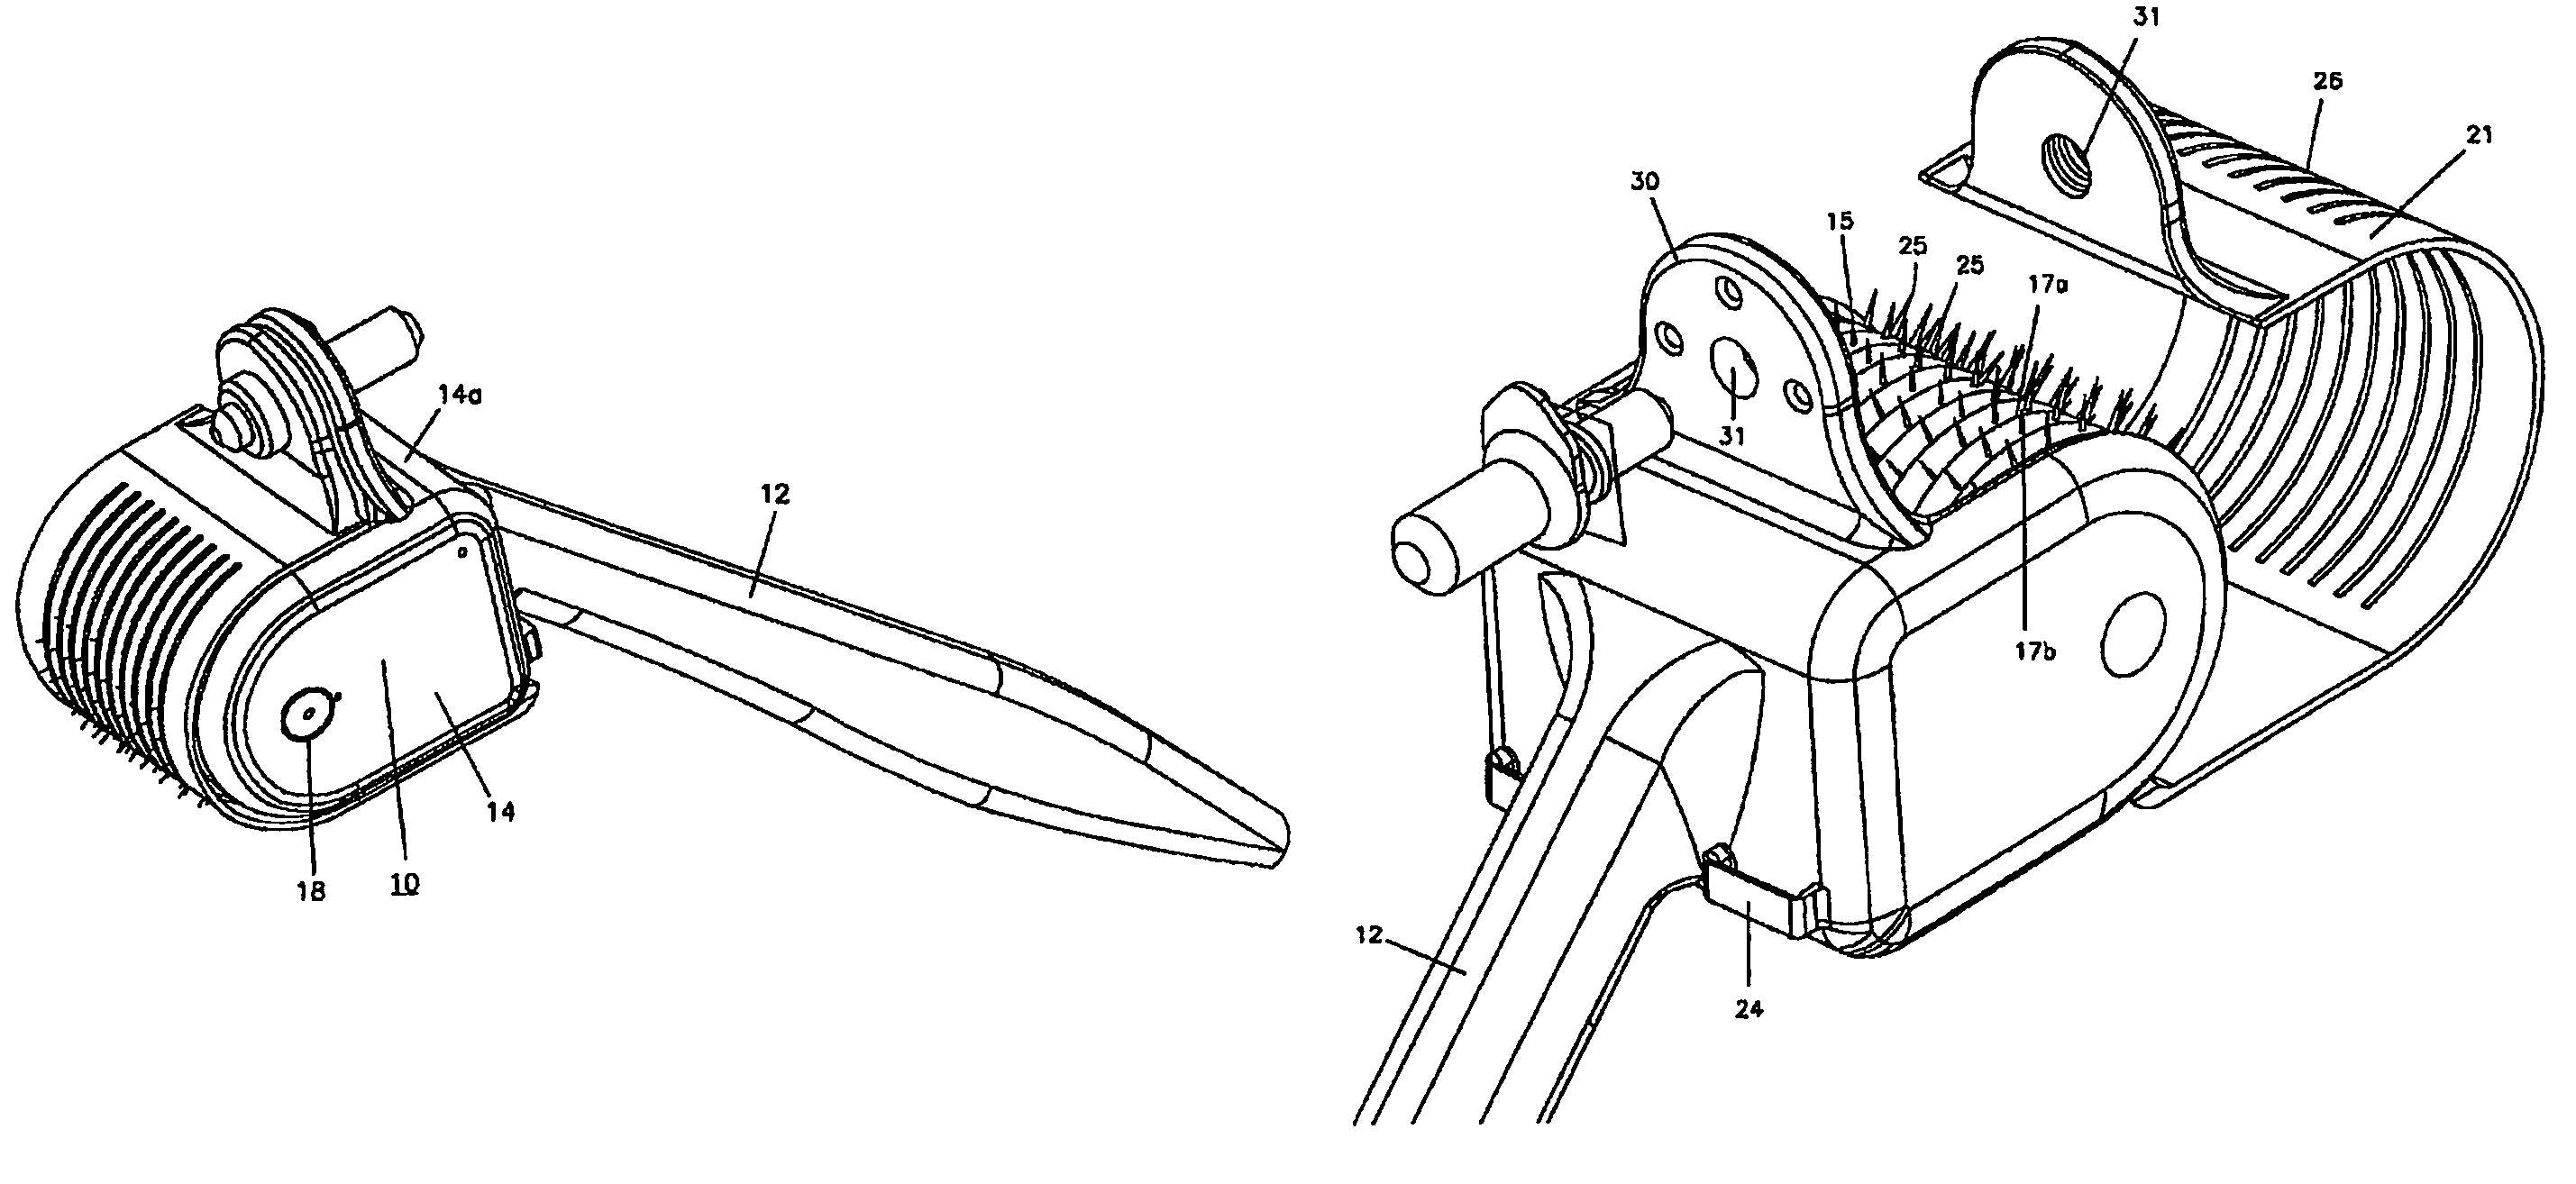 Apparatus for skin stimulation and subcutaneous tissue therapy